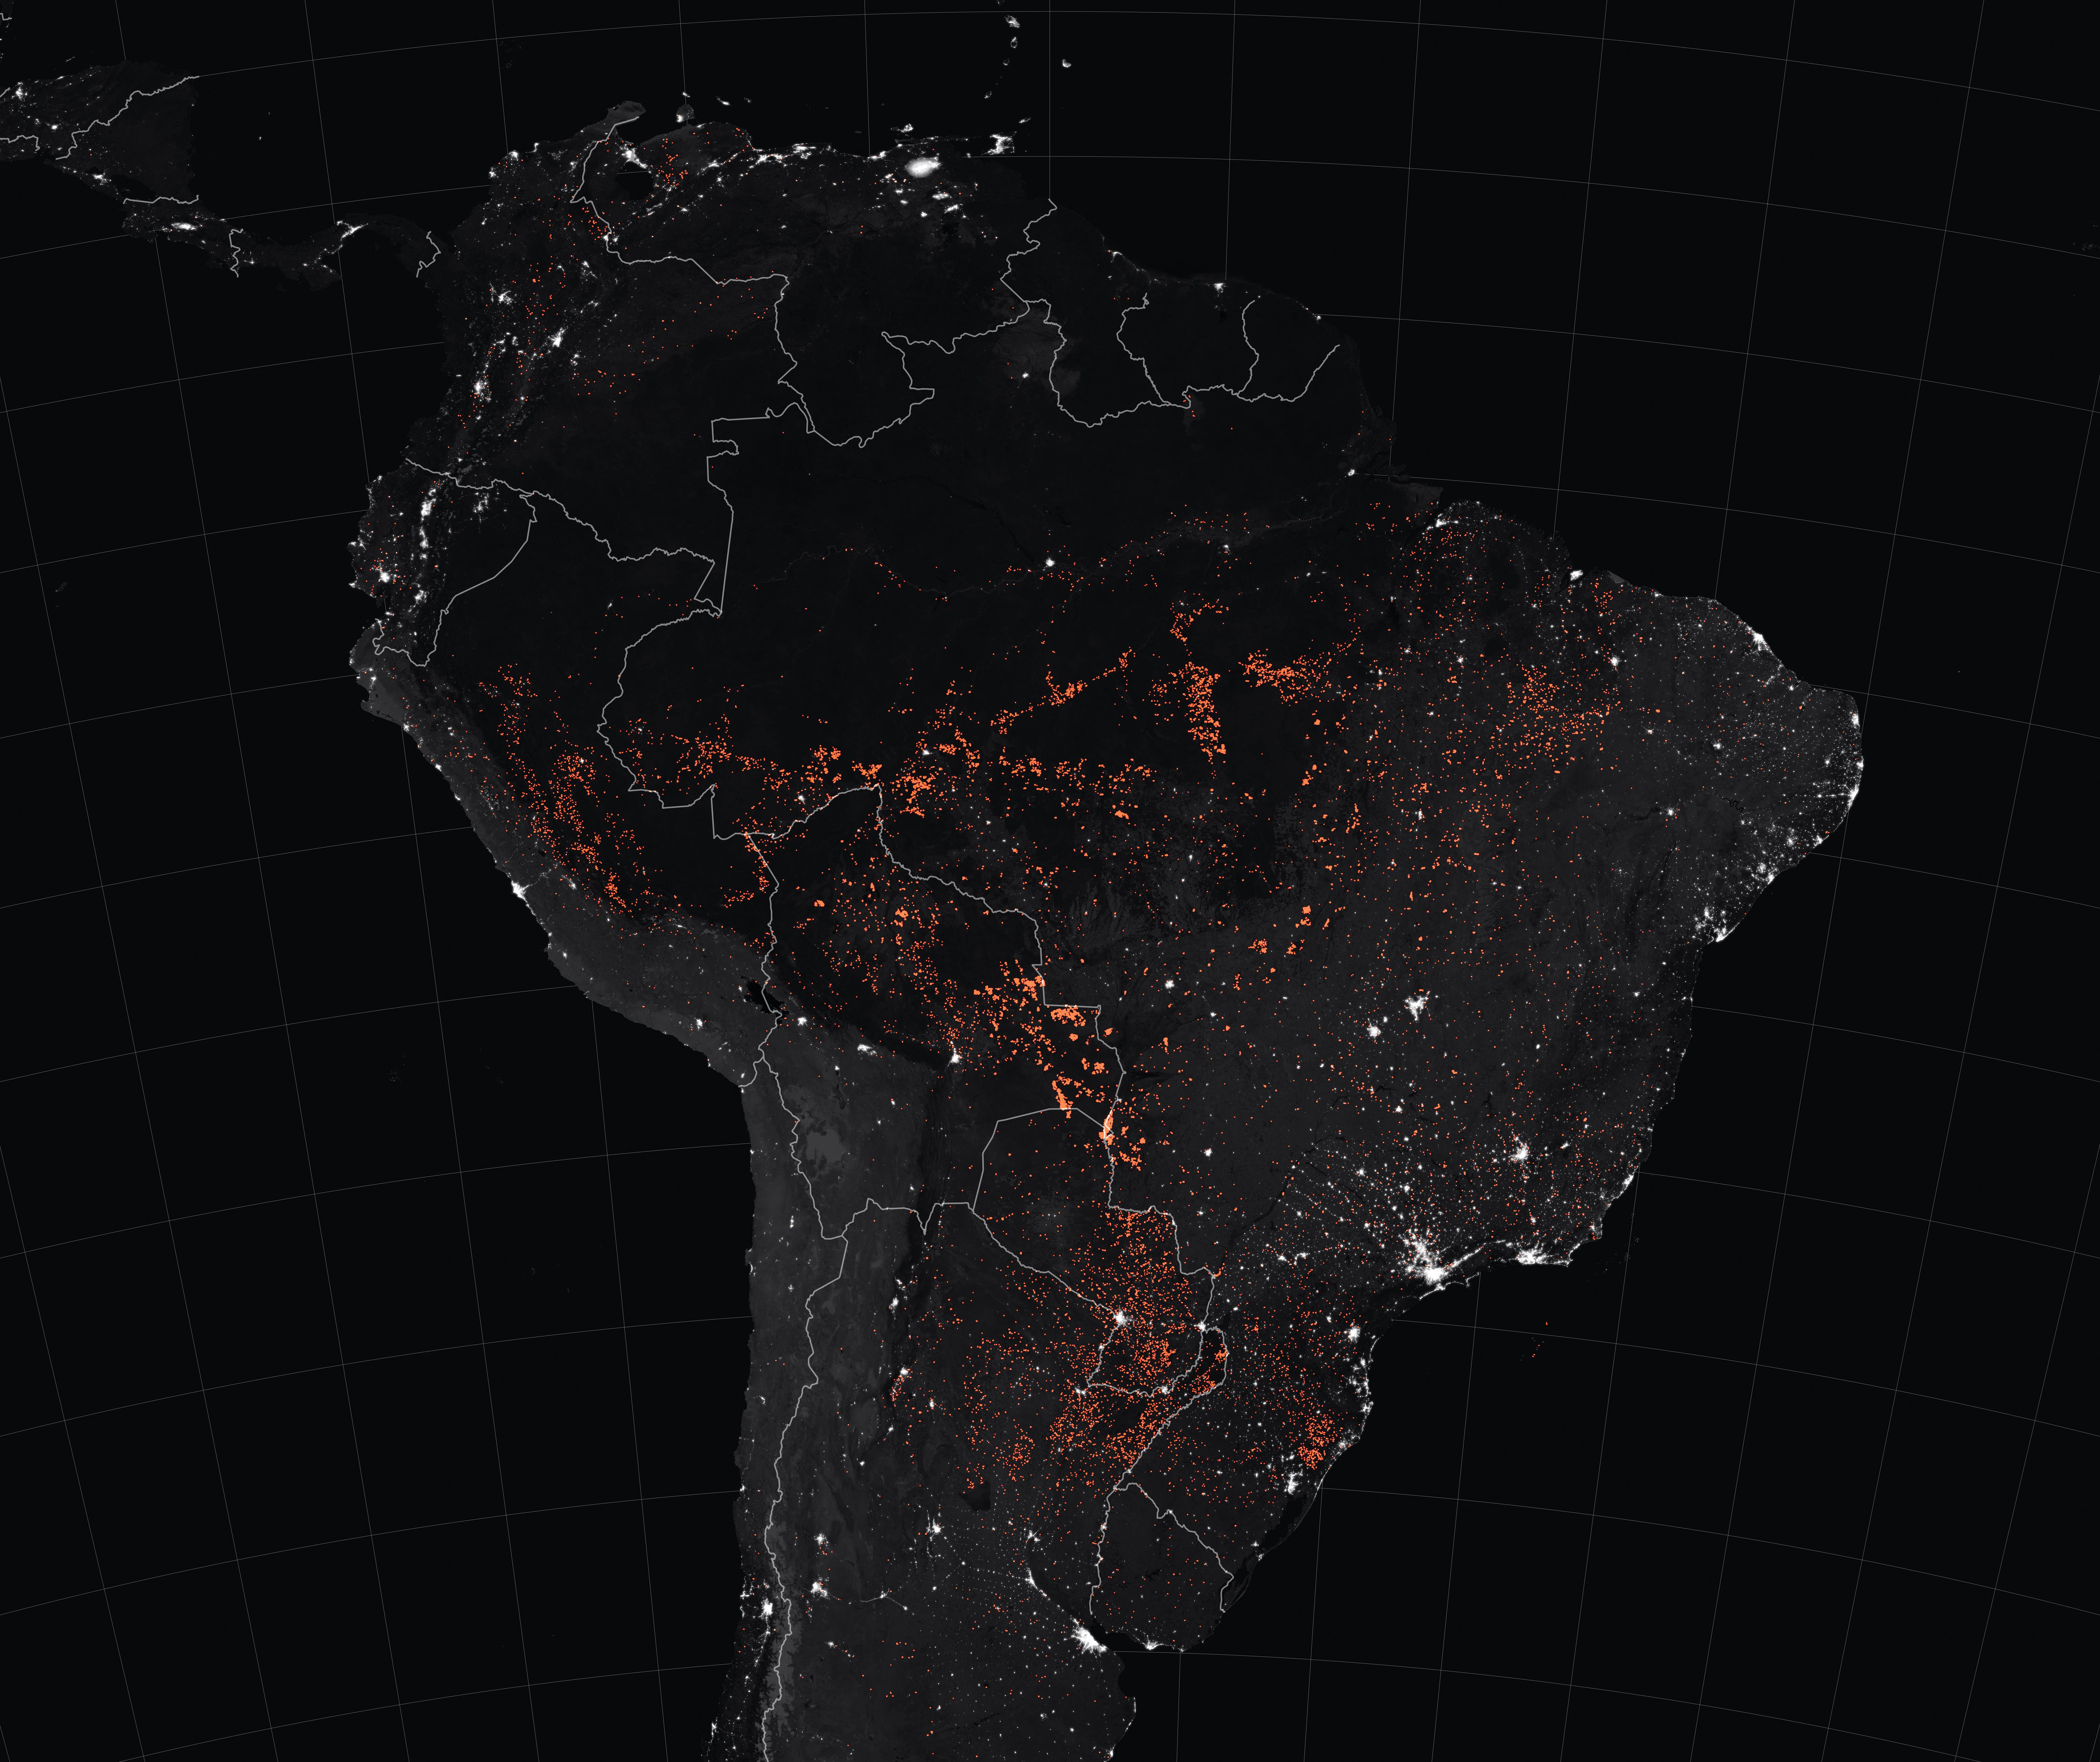 South America Fires